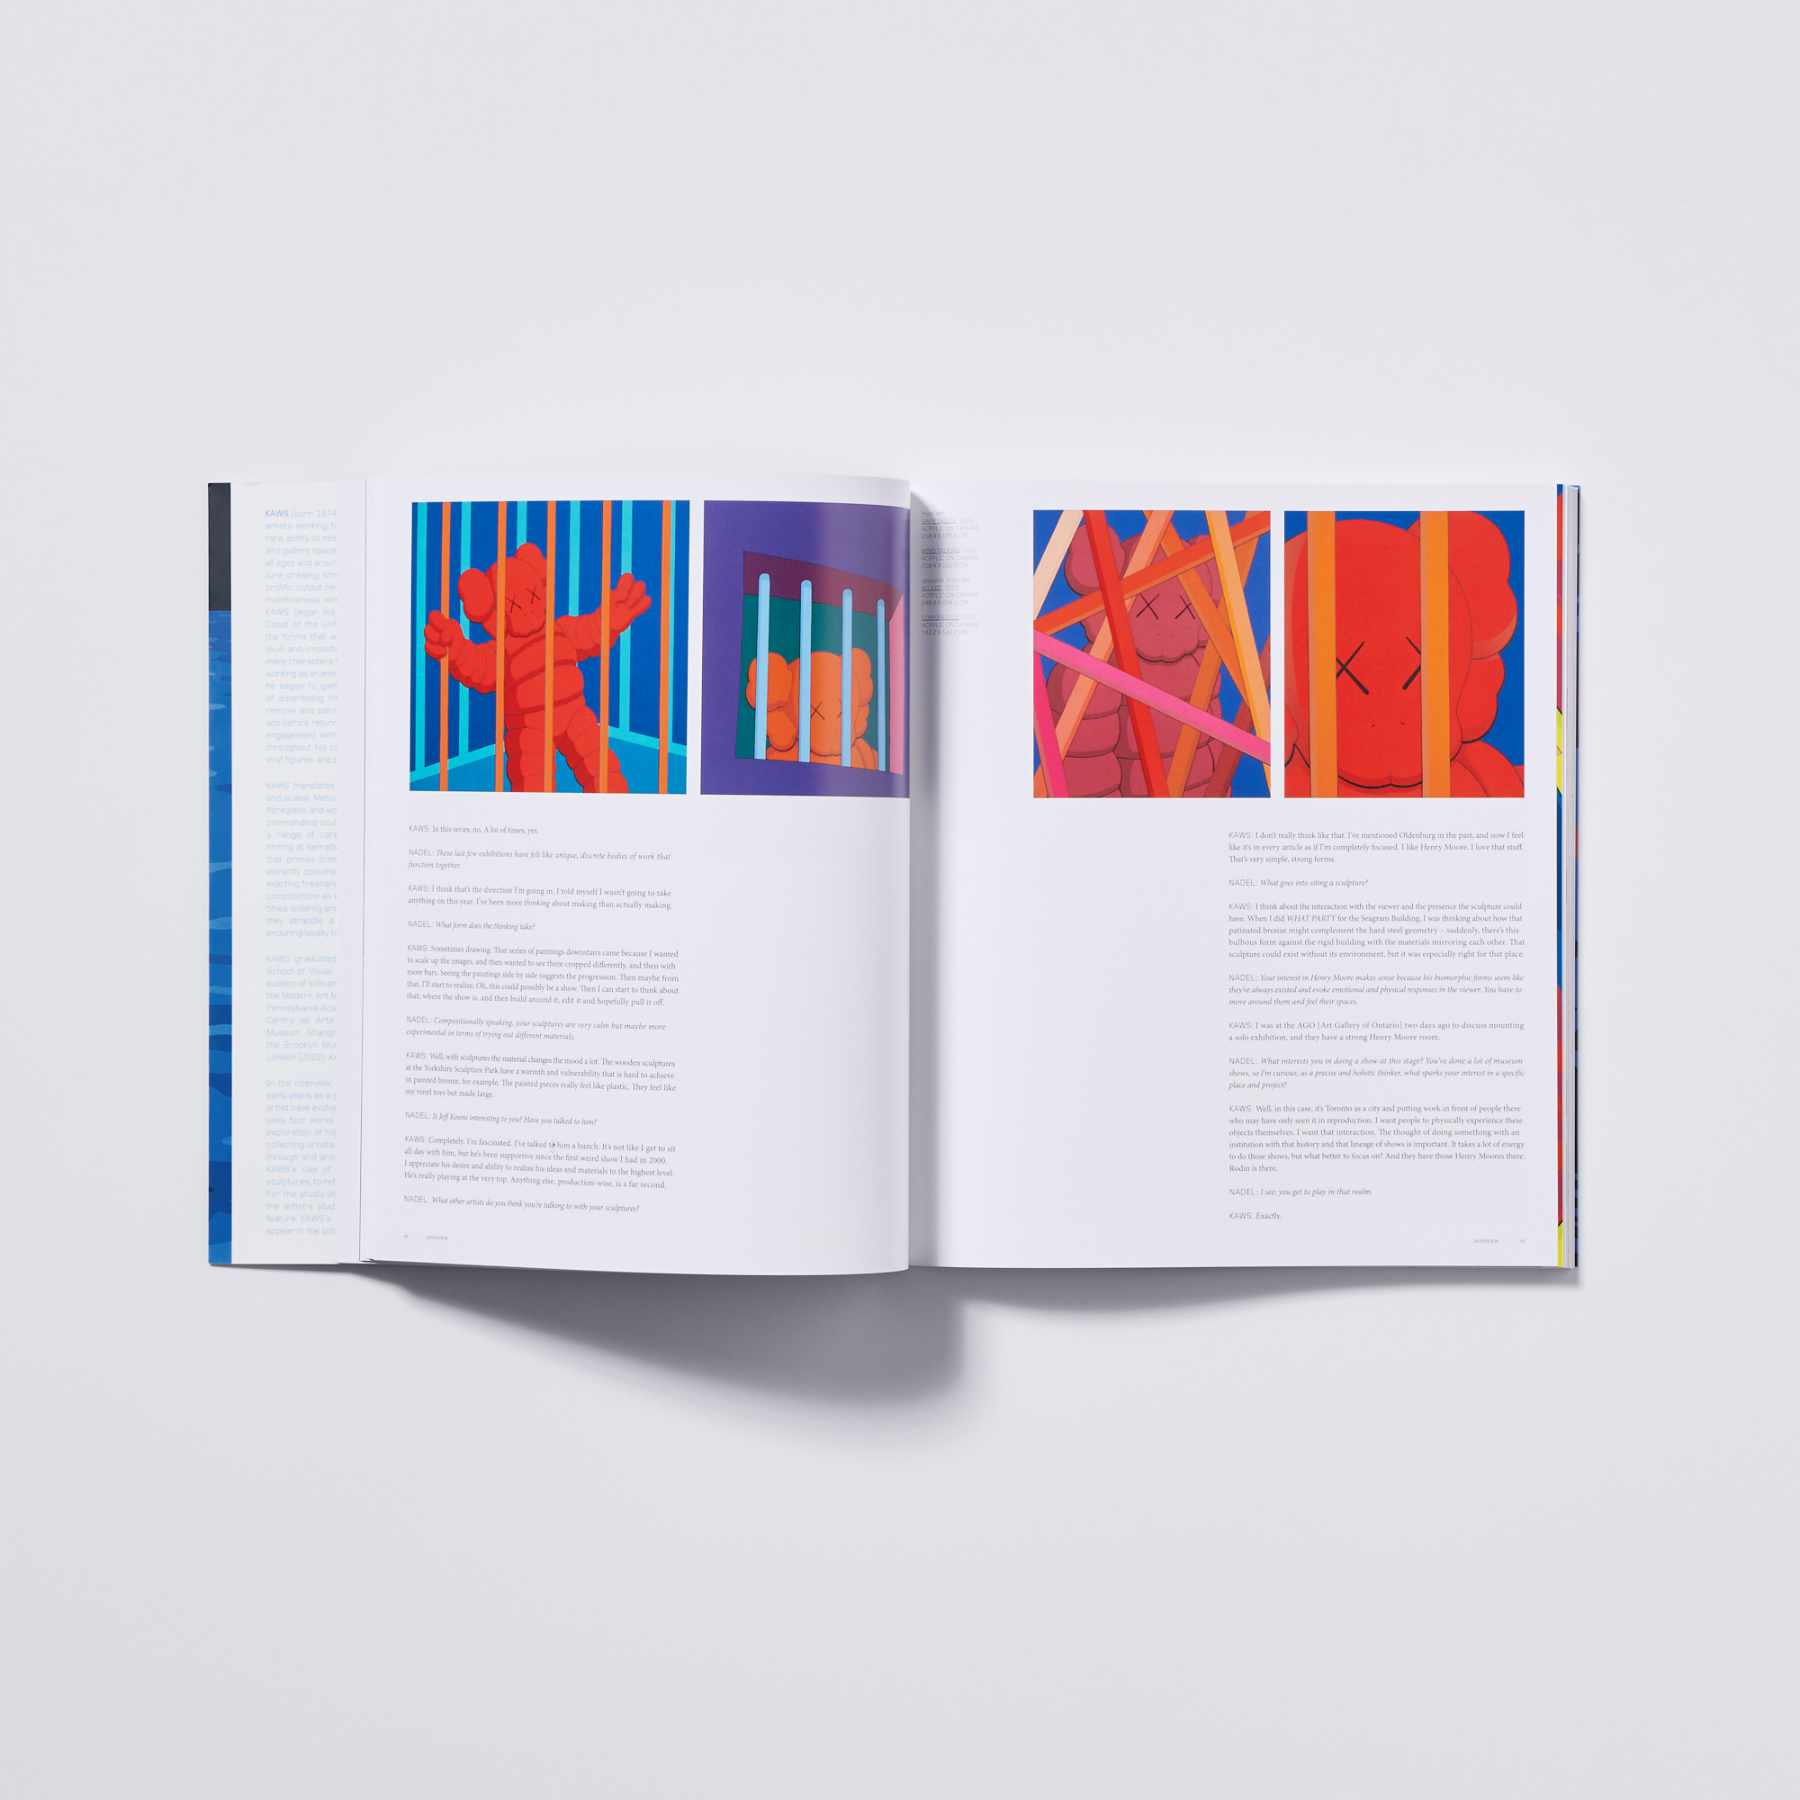 A detailed photograph of the KAWS 'What Party' book published by Phaidon